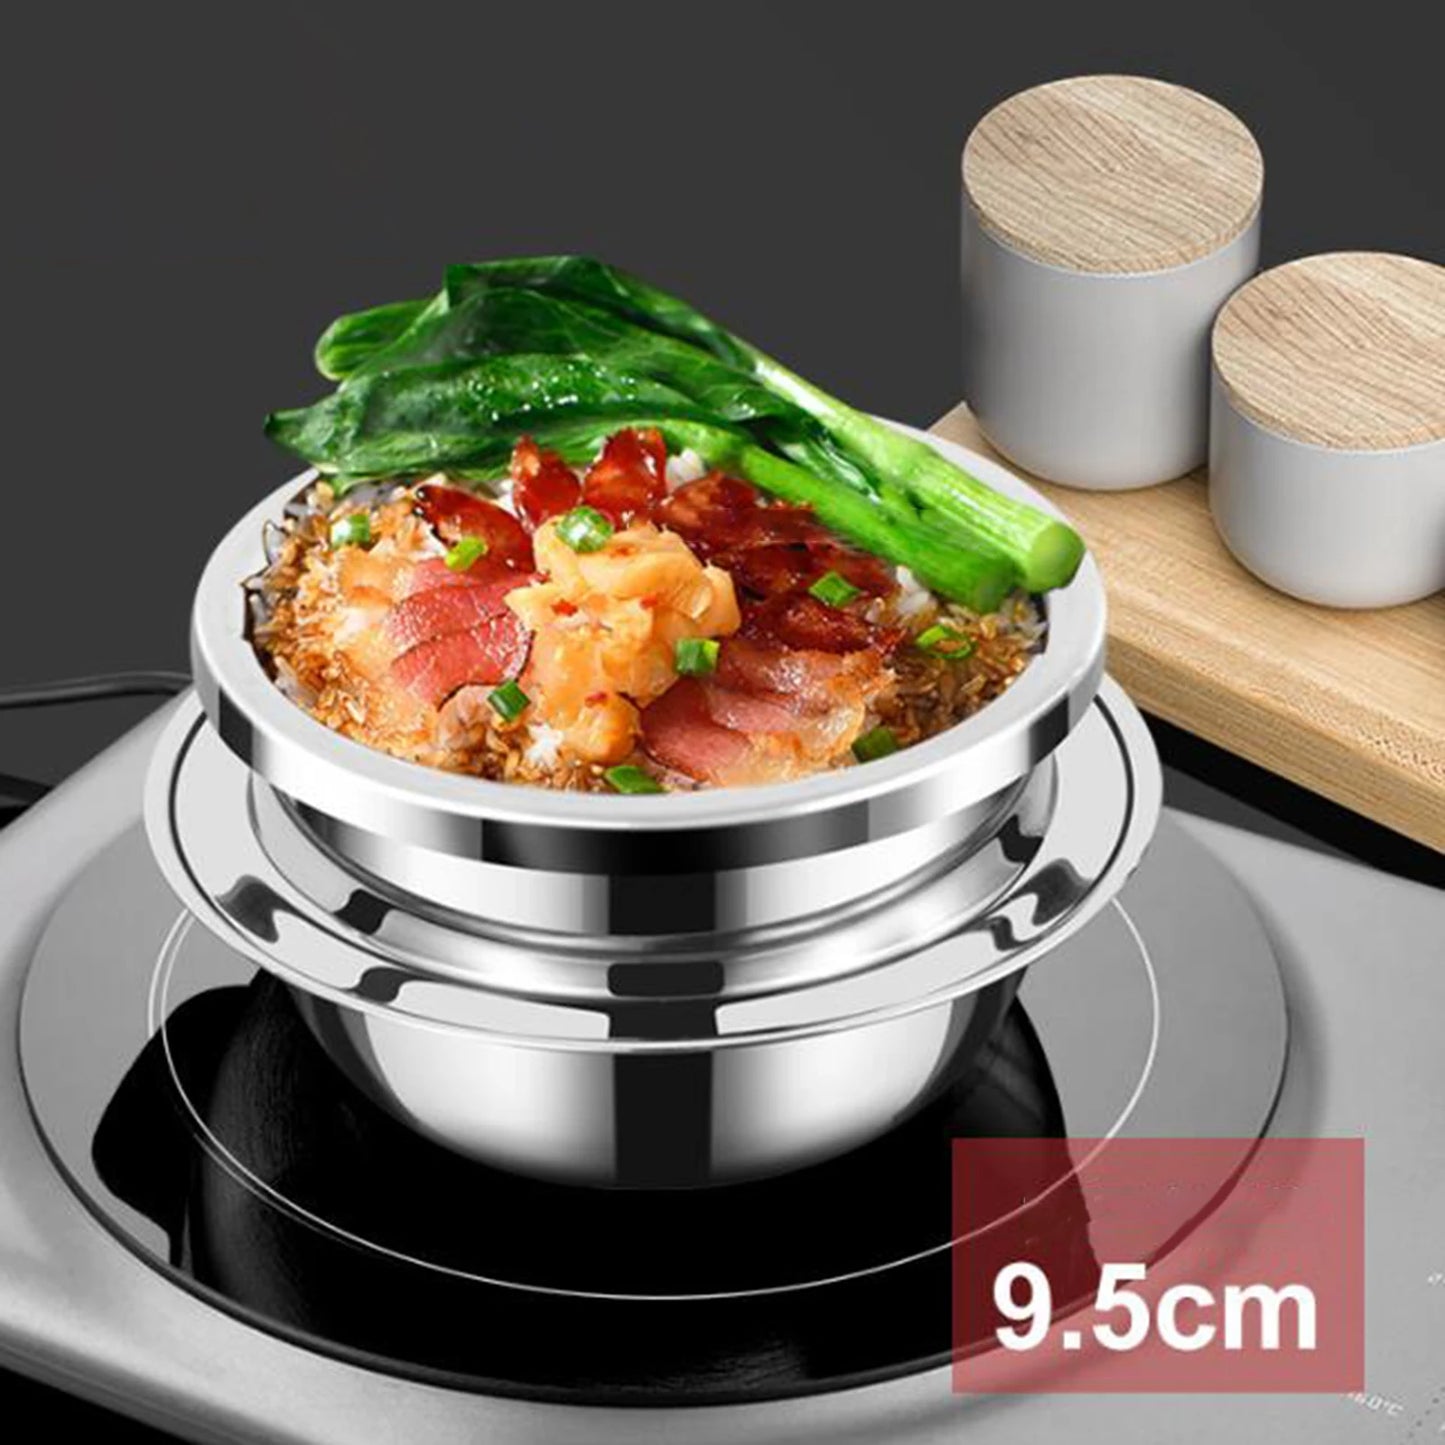 Mini Stainless Steel Pressure Cooker
Small Pressure Cooker
Cooker Pot Outdoor
Household Fragrant Rice Cooker